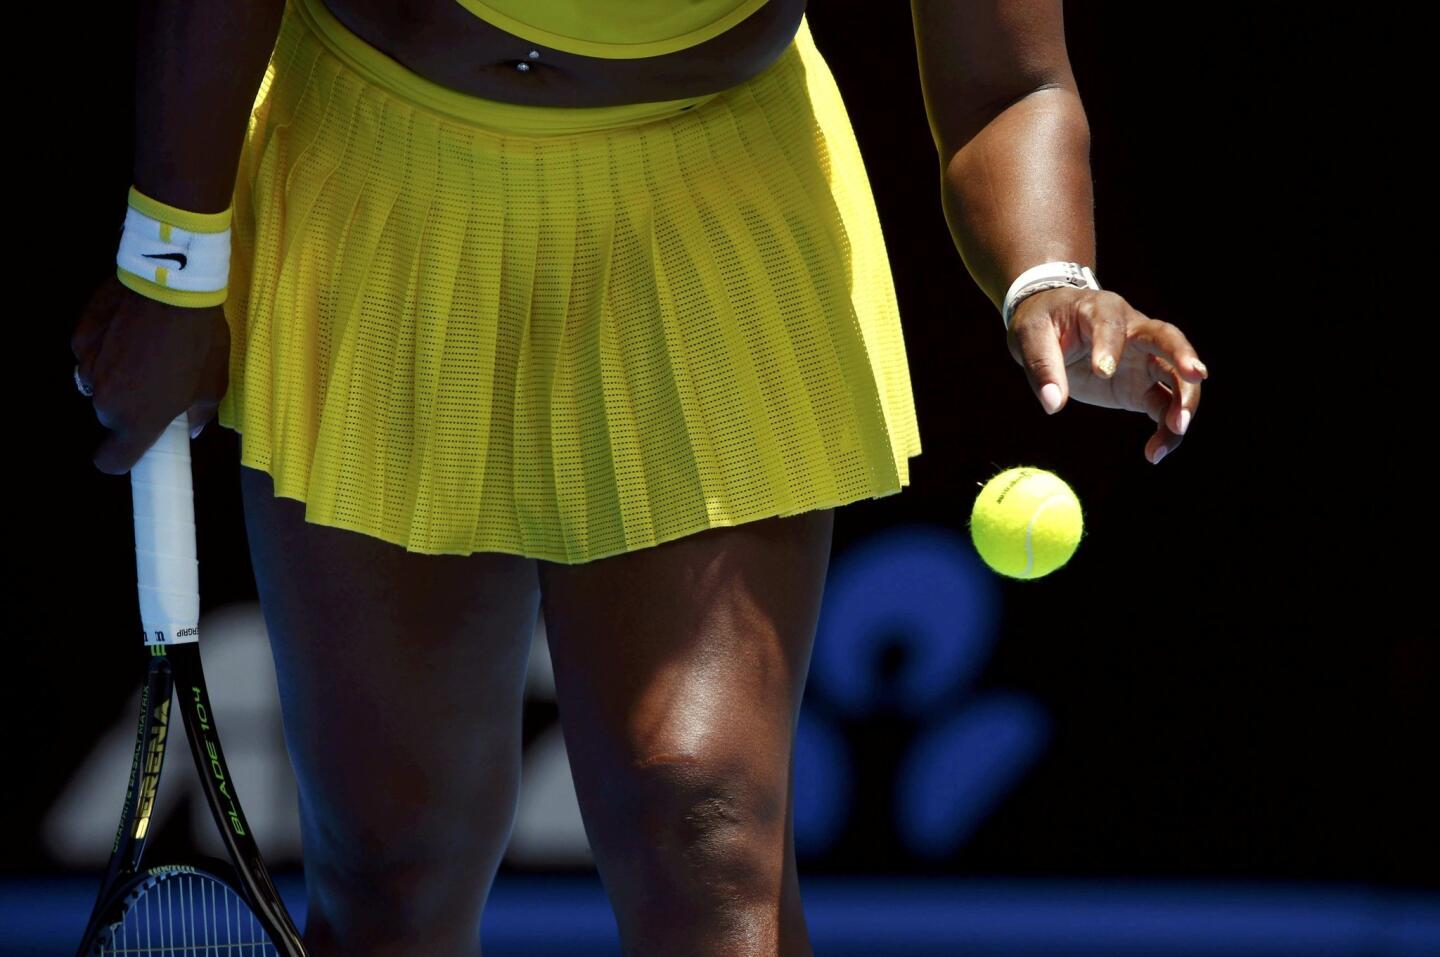 Serena Williams of the U.S. prepares to serve during her first round match against Italy's Camila Giorgi at the Australian Open tennis tournament at Melbourne Park, Australia, January 18, 2016. REUTERS/Jason Reed ** Usable by SD ONLY **